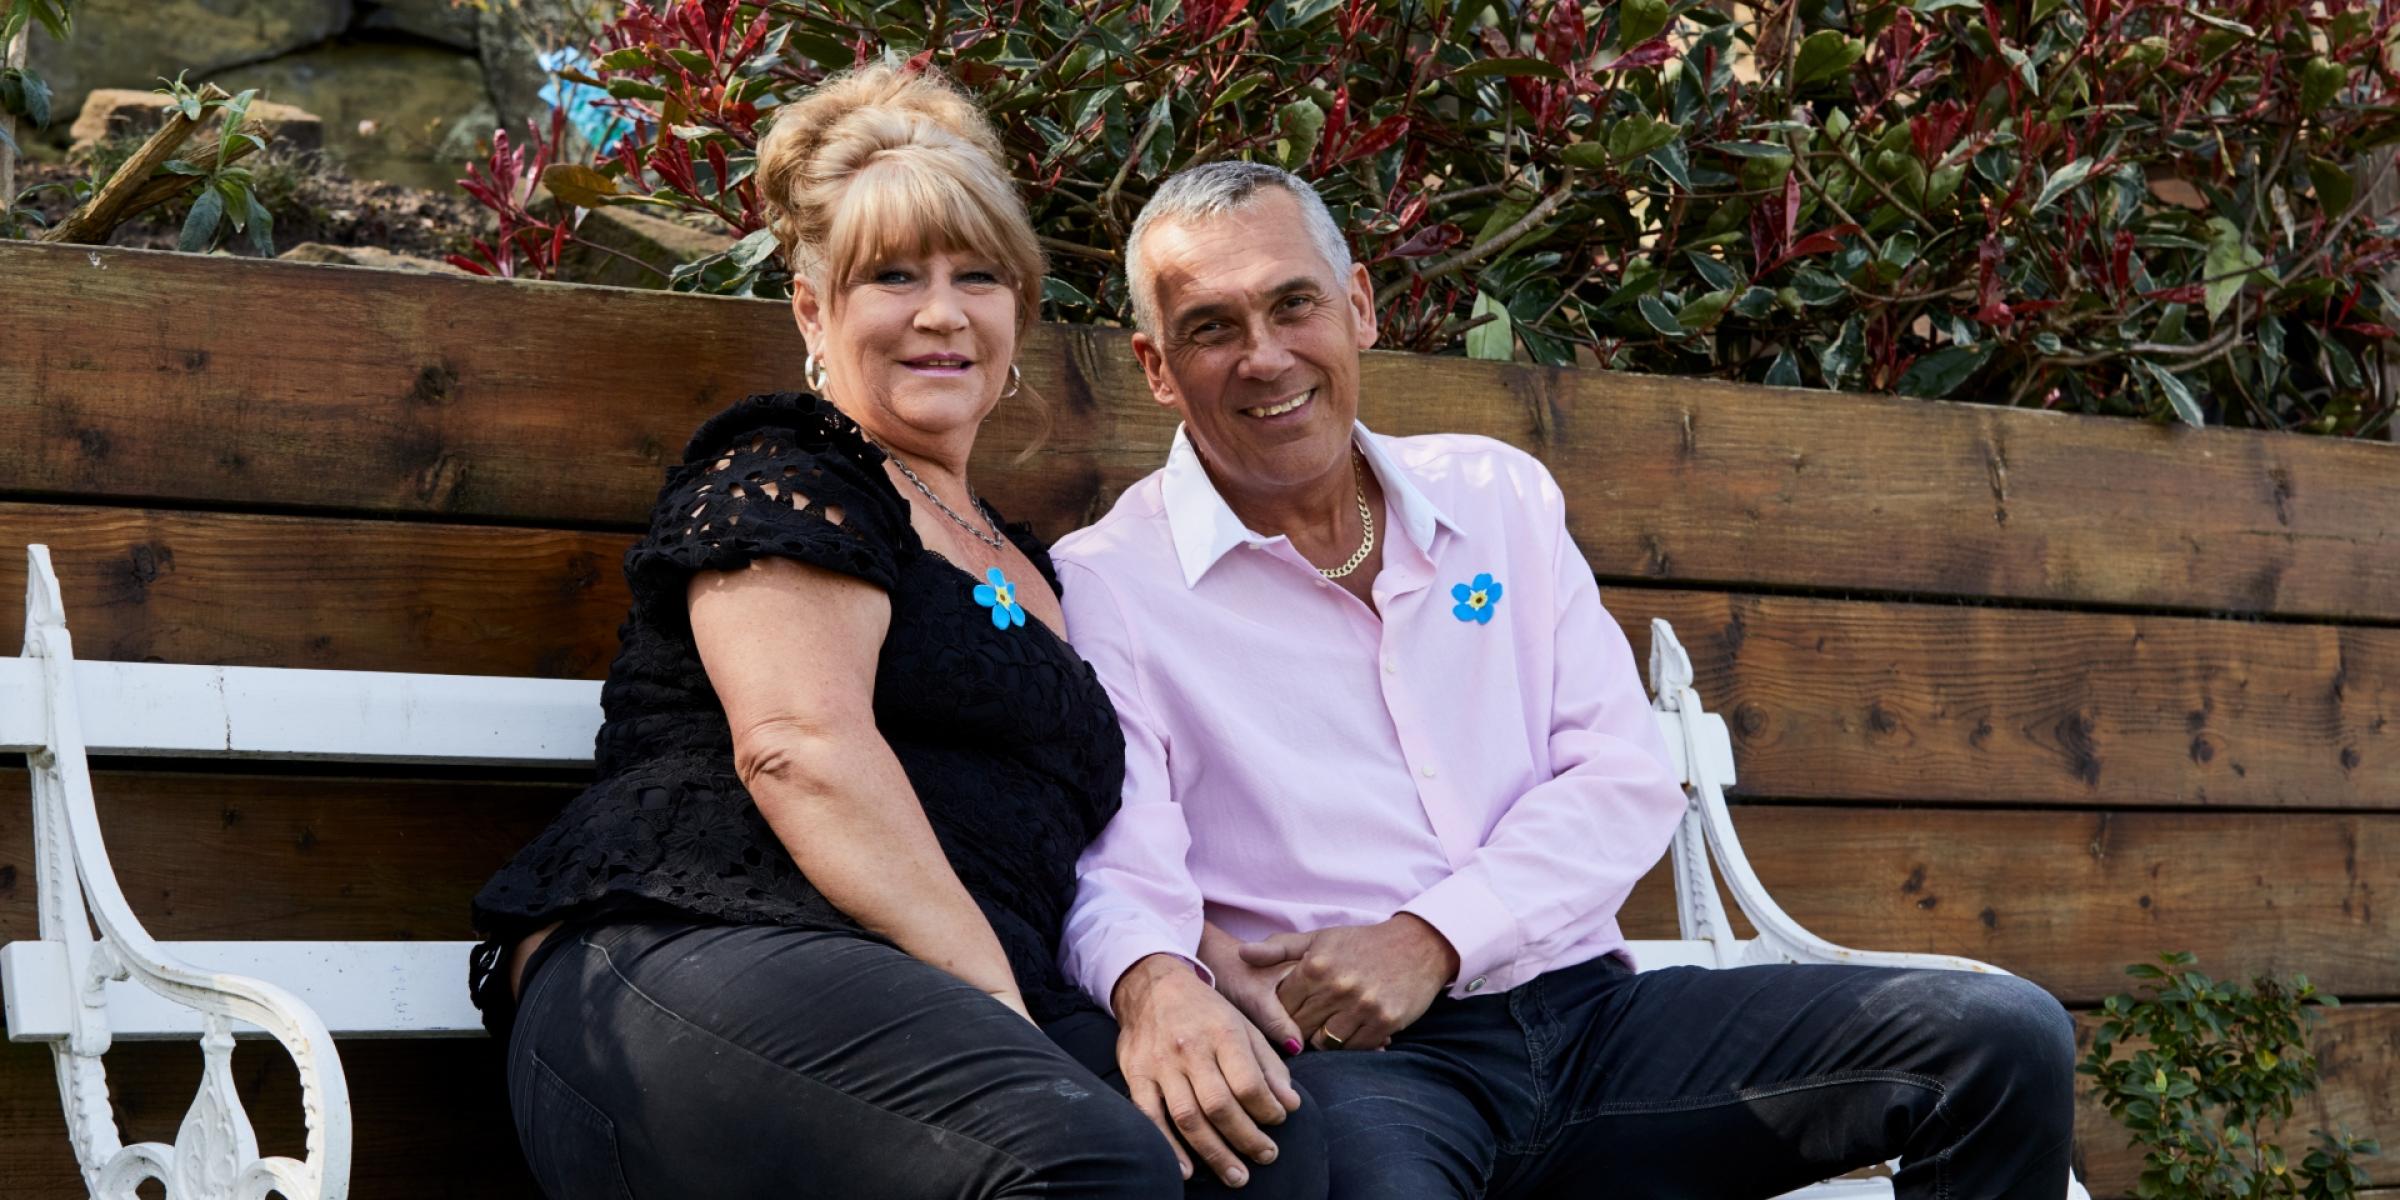 A woman and man sit on a garden bench smiling, wearing Alzheimer's Society Forget Me Not badges